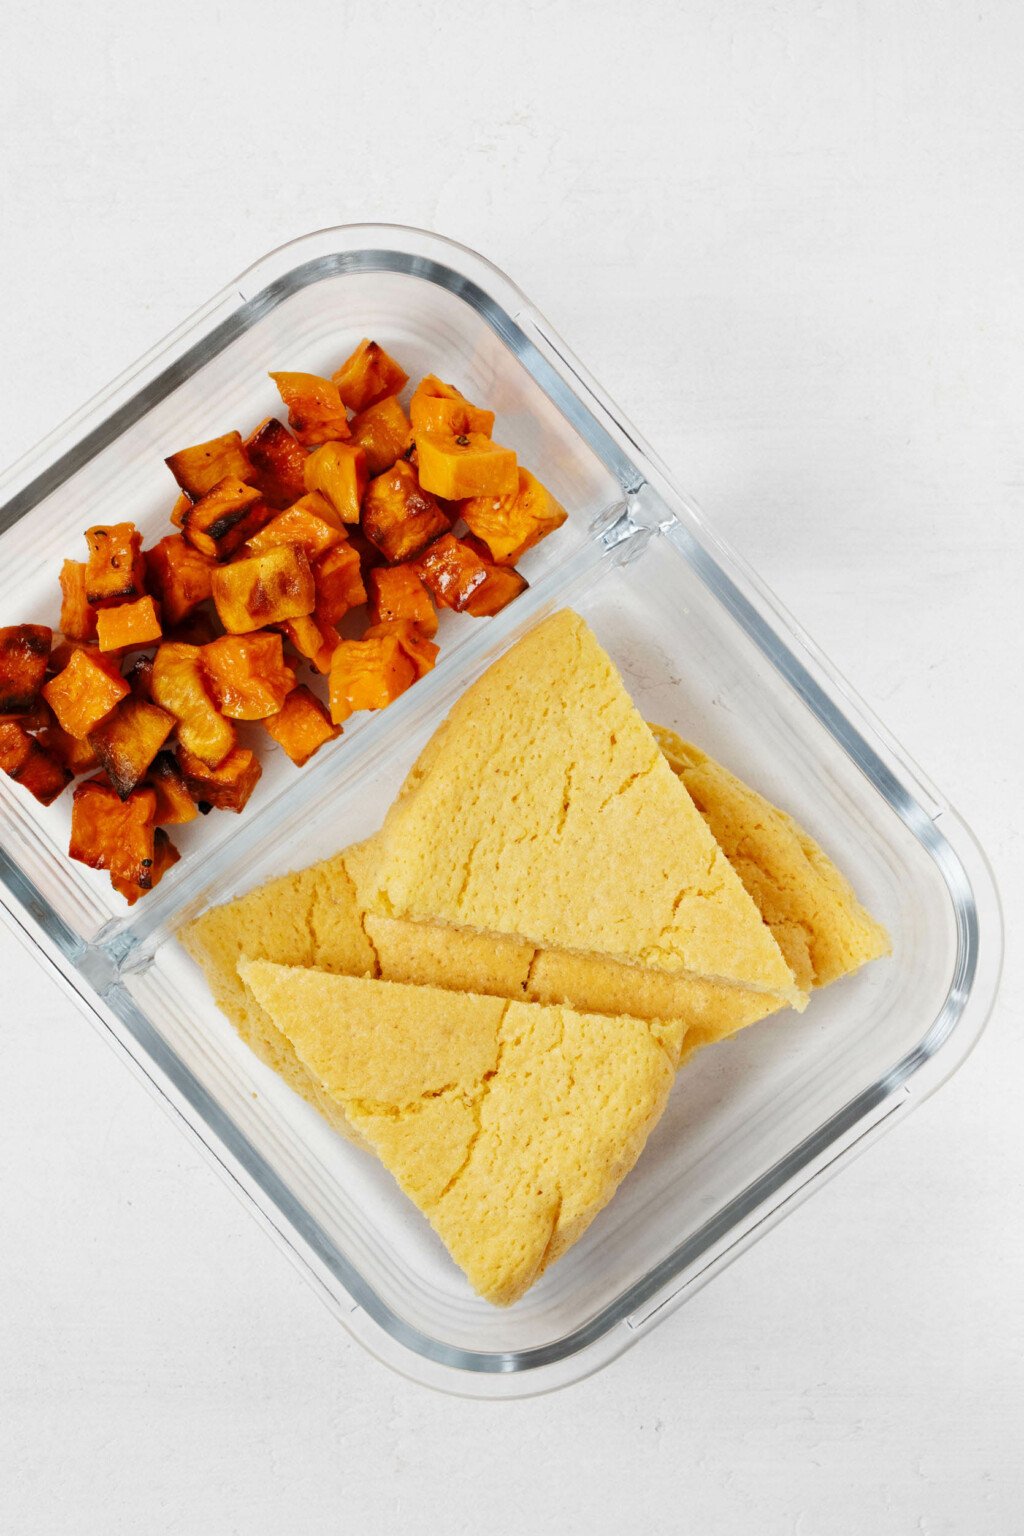 Slices of a vegan chickpea frittata have been packed in a glass container with roasted sweet potato cubes.